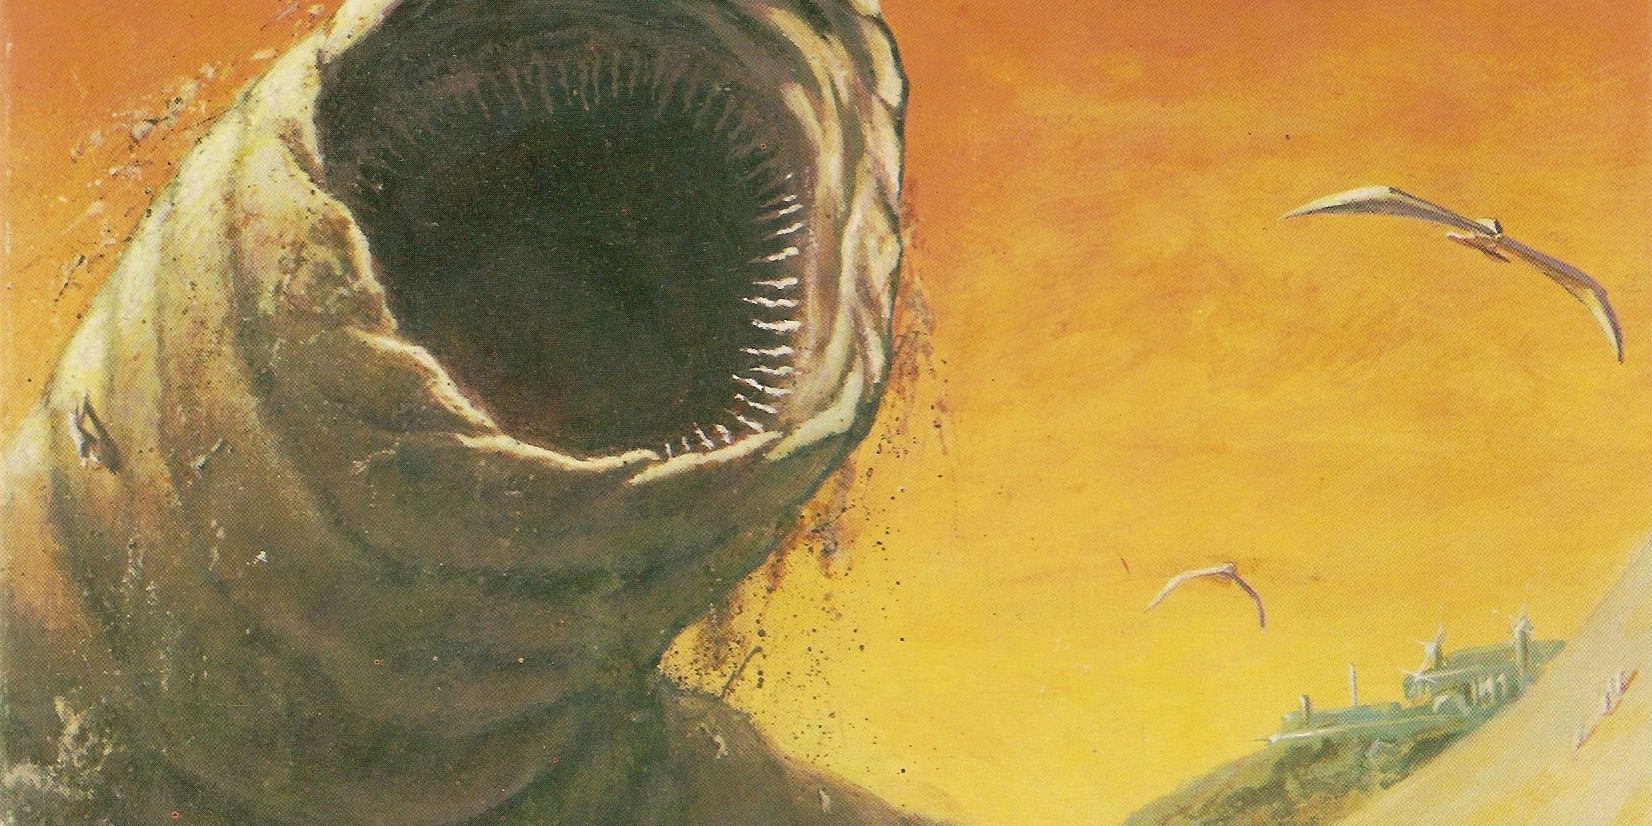 A sandworm emerging from the dust on the cover of Dune novel.